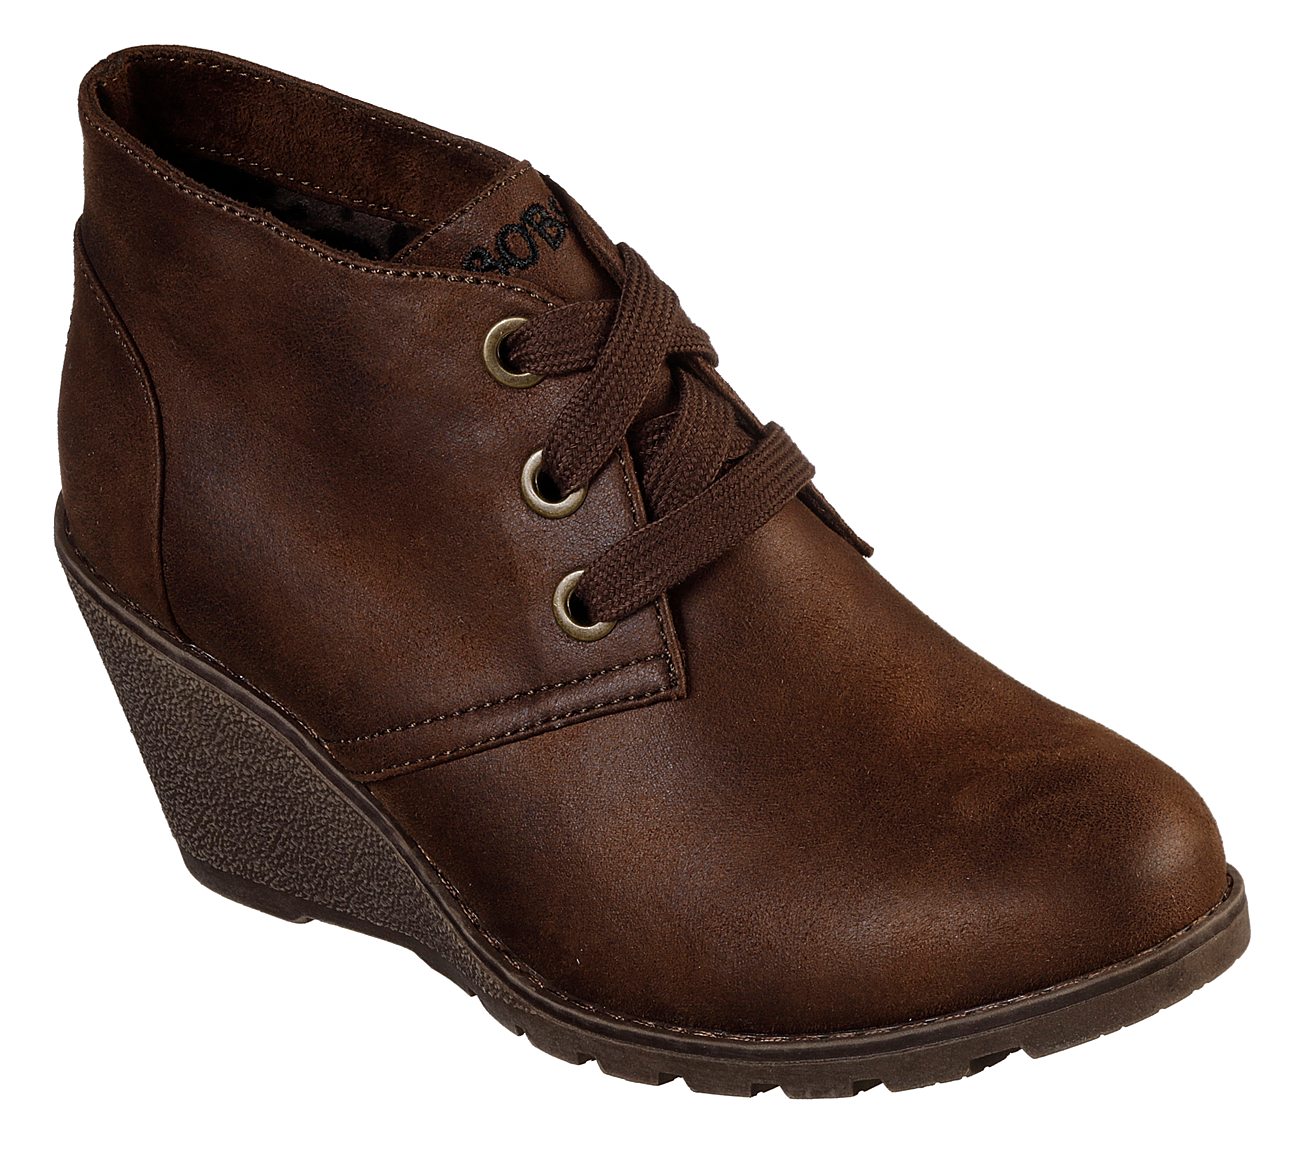 SKECHERS BOBS Tumble Weed - Goin West 